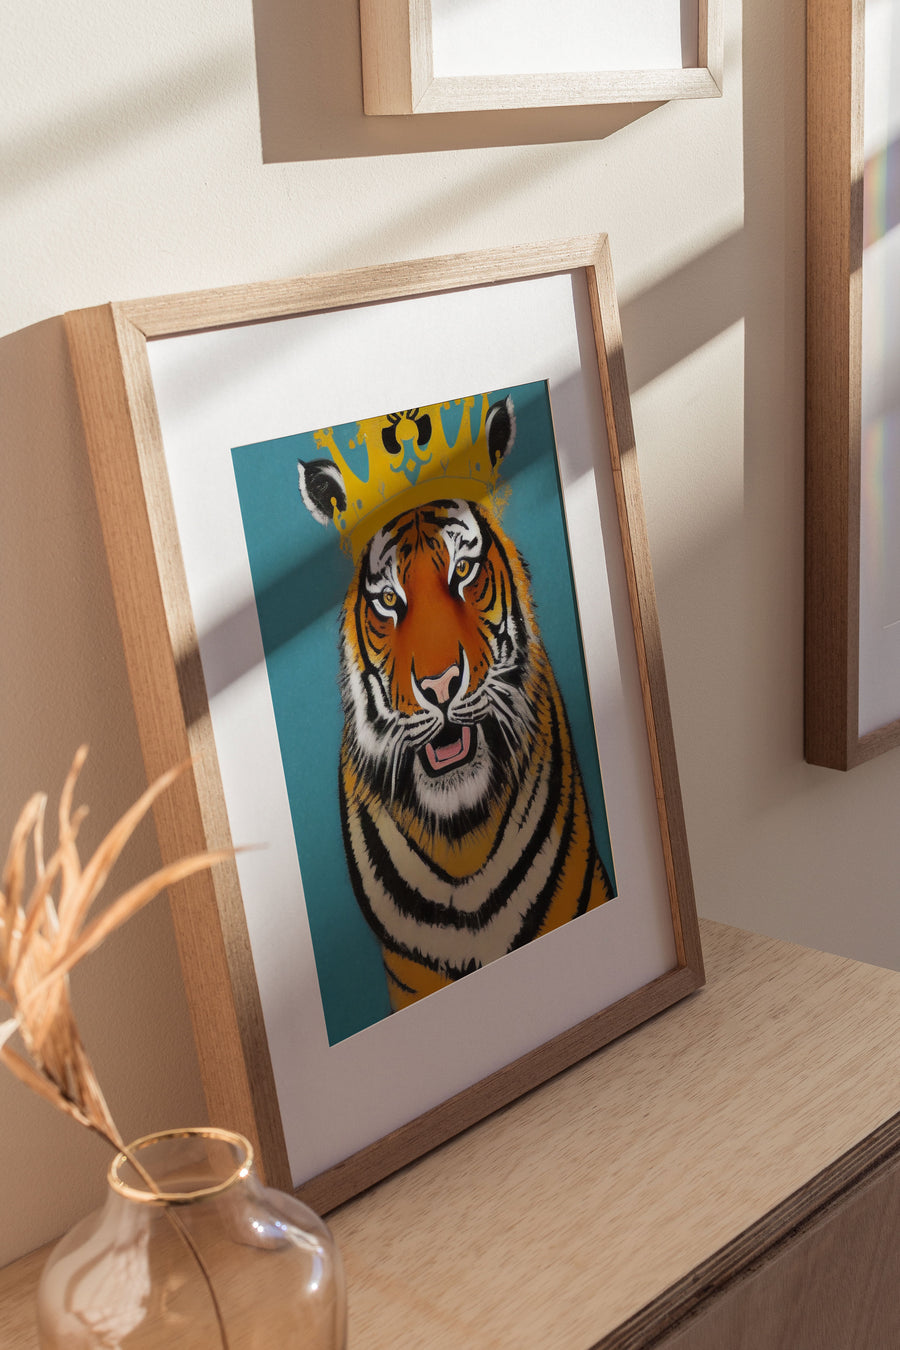 How tiger wall art can help bring positive energy to our homes